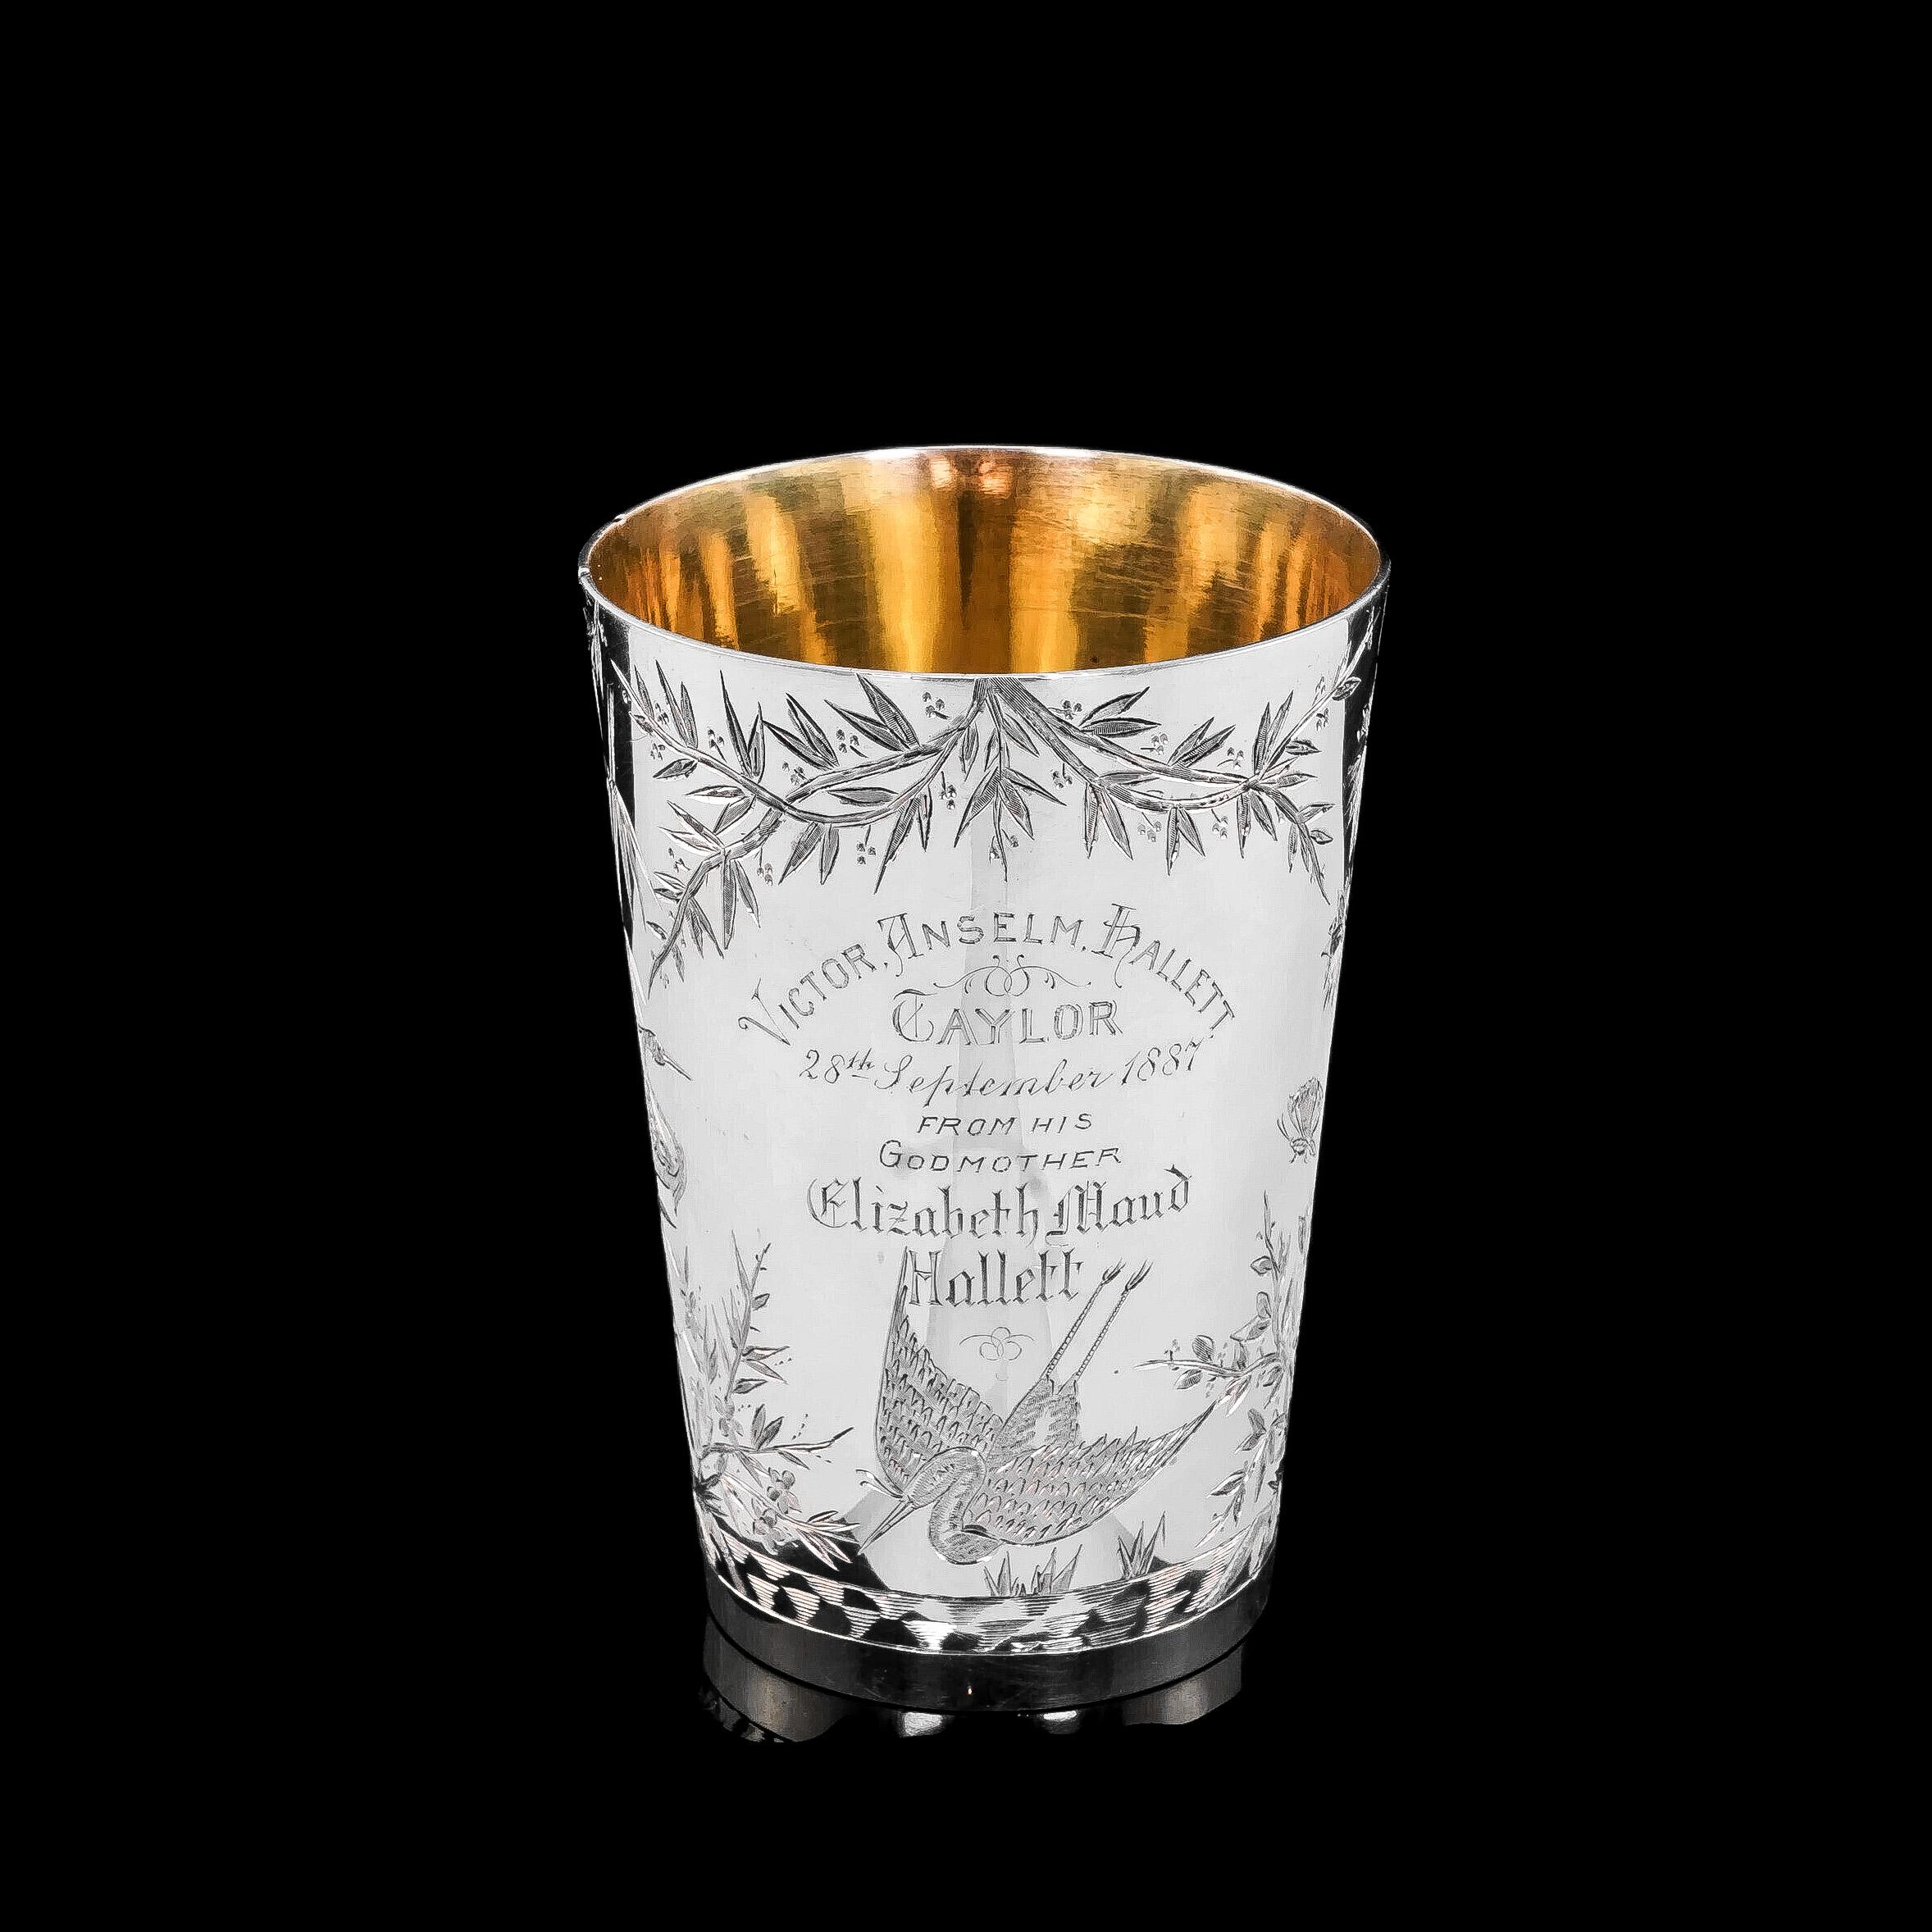 Engraved Antique Solid Silver Aesthetic Style Beaker/Cup, John Adlwinckle & James Slater